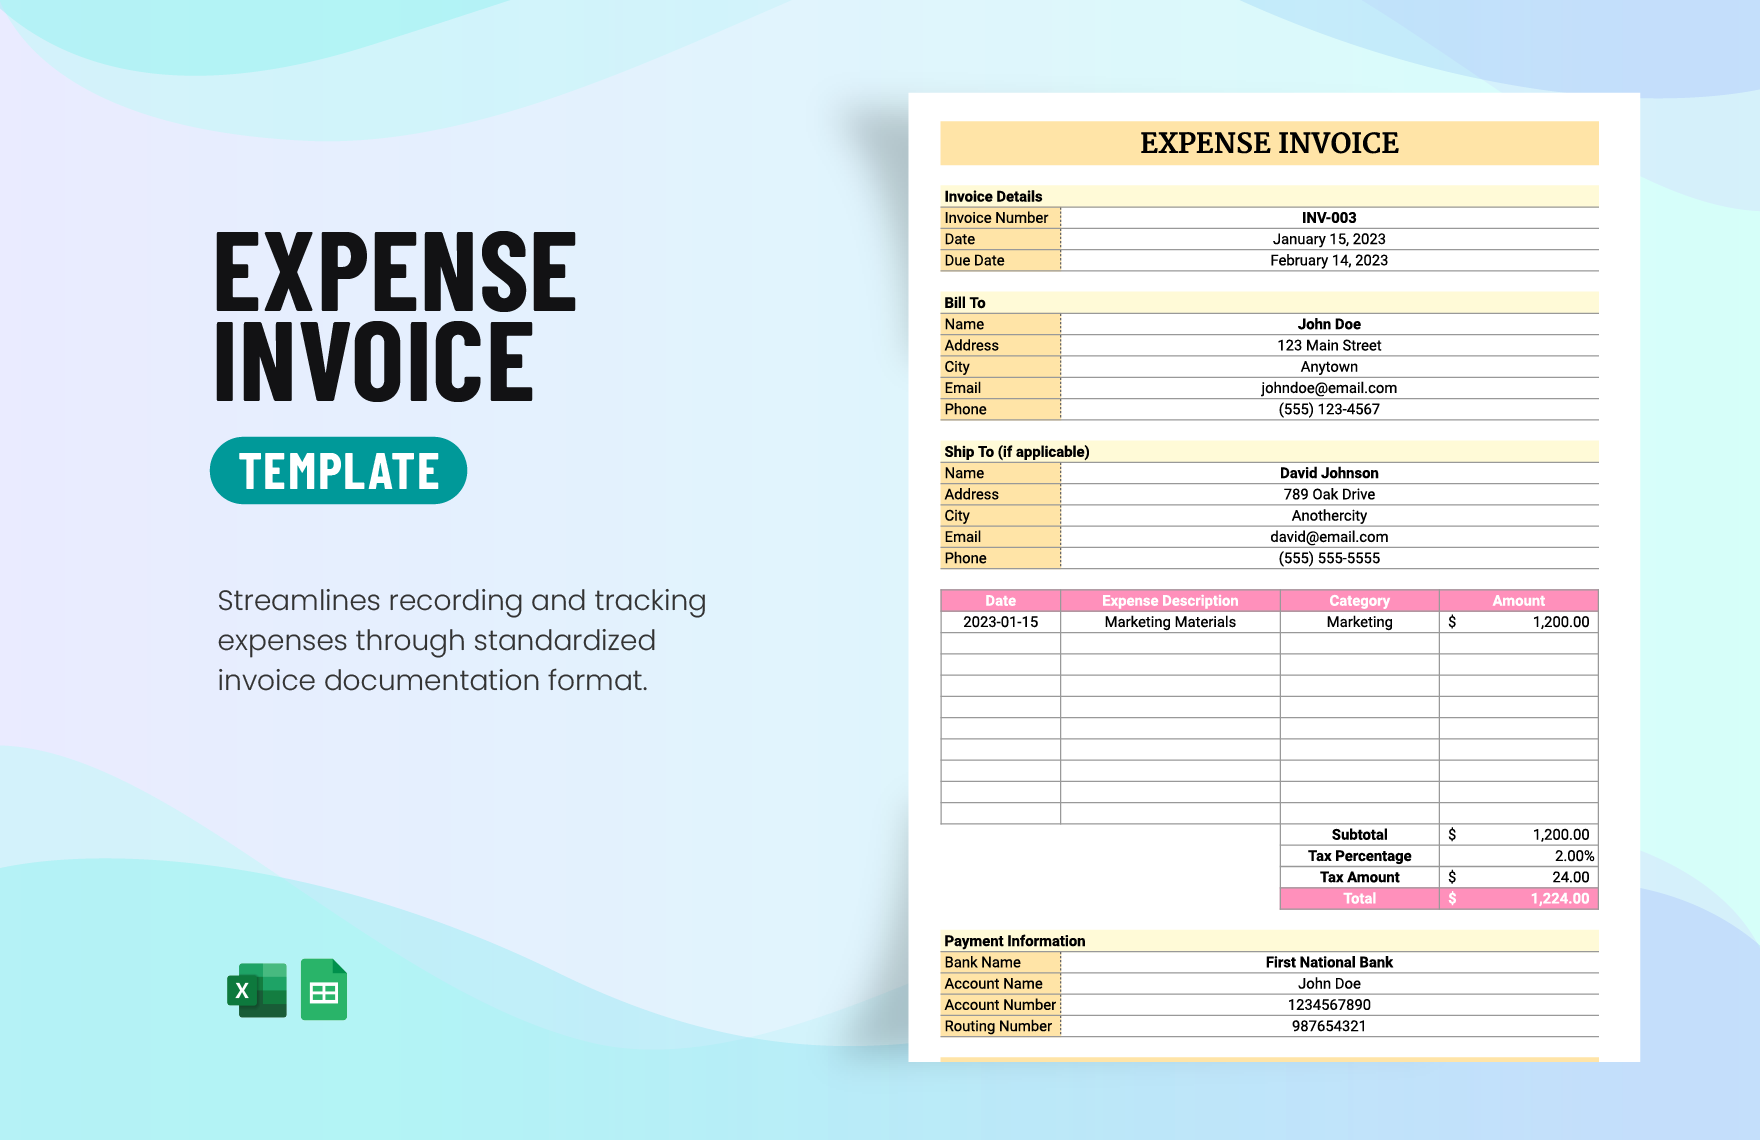 Expense Invoice Template in Excel, Google Sheets